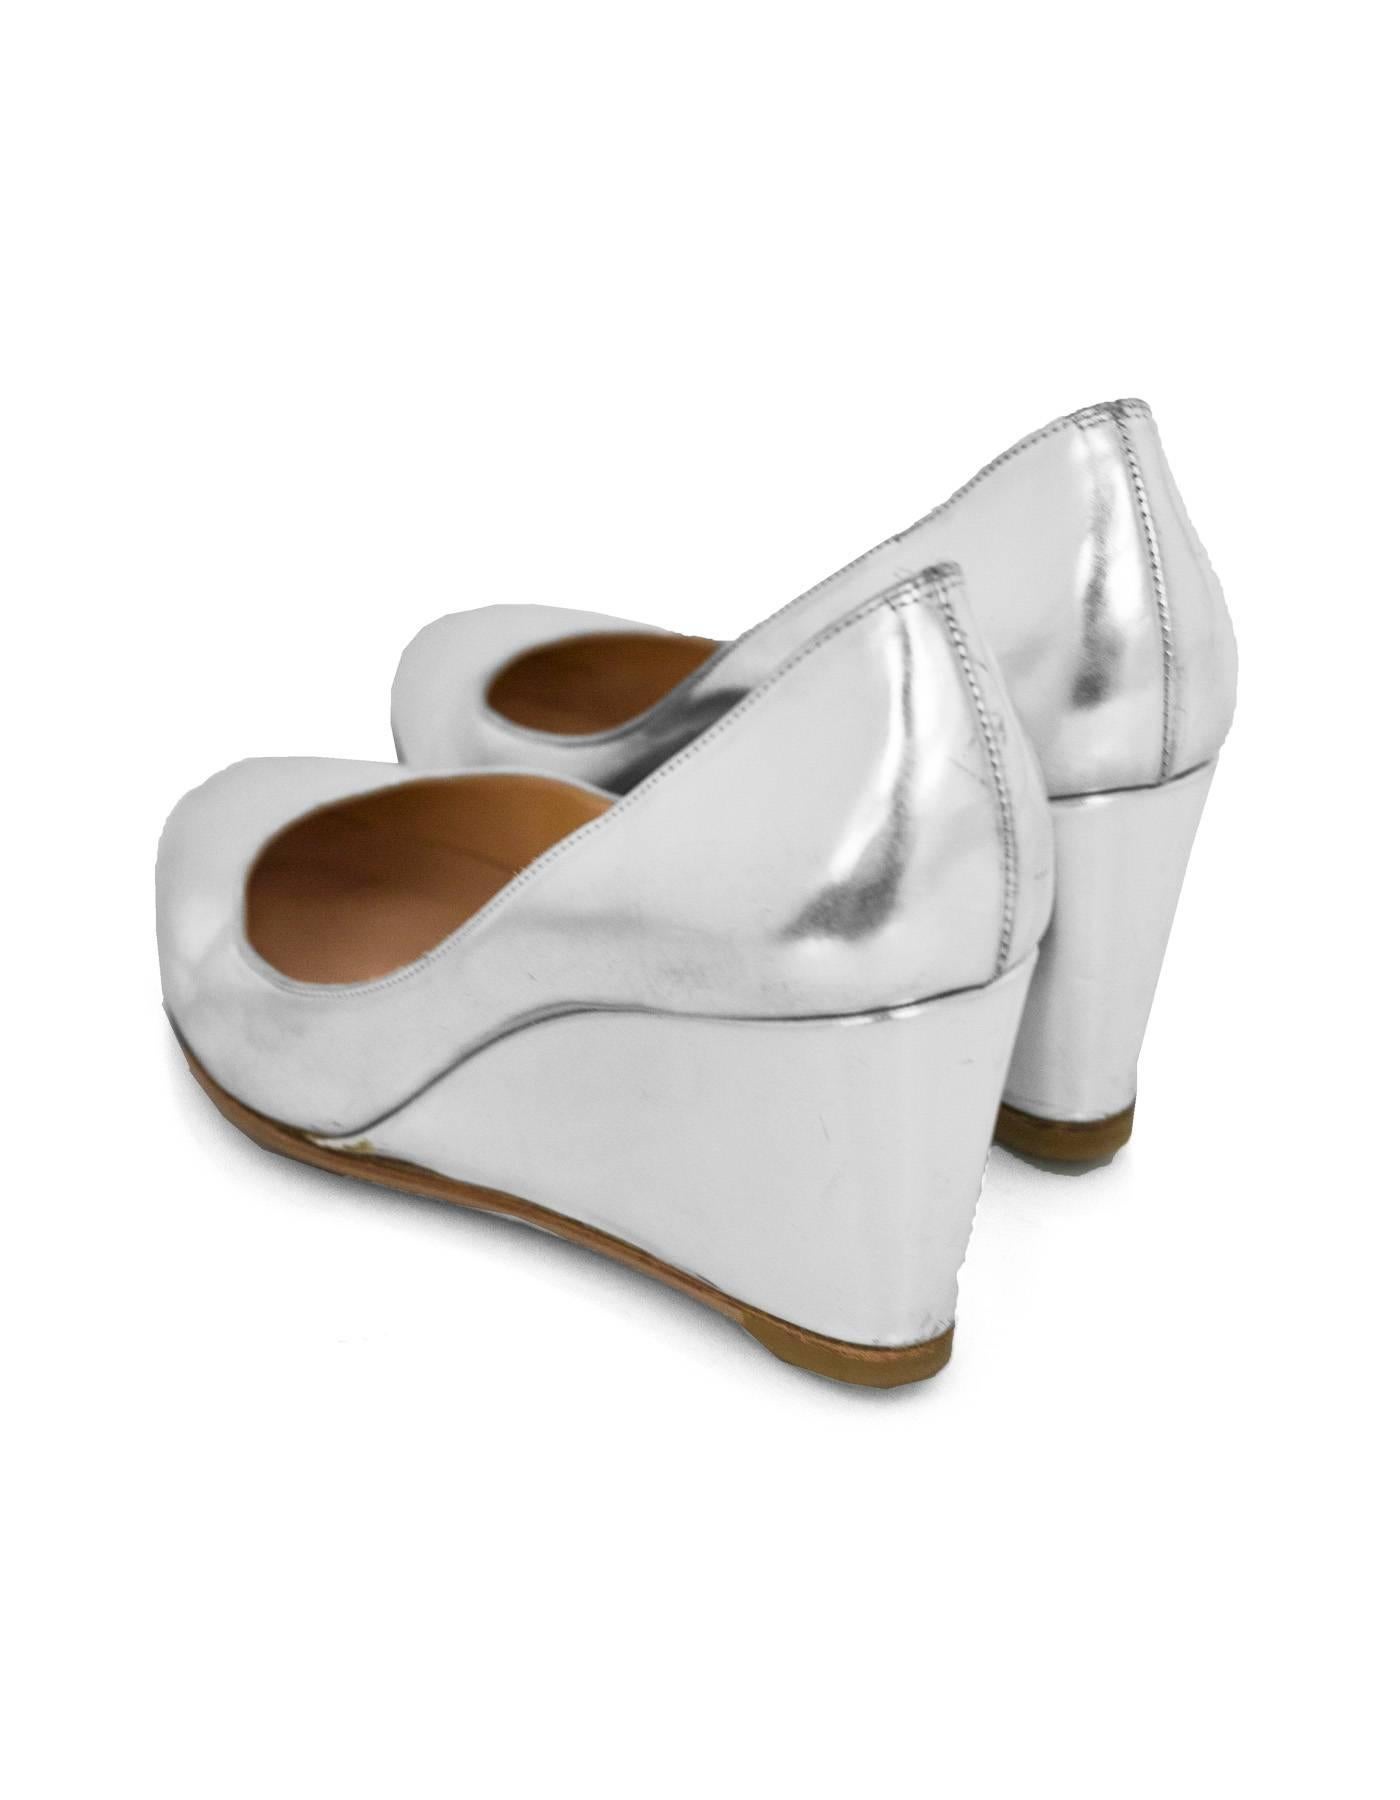 louboutin wedges silver